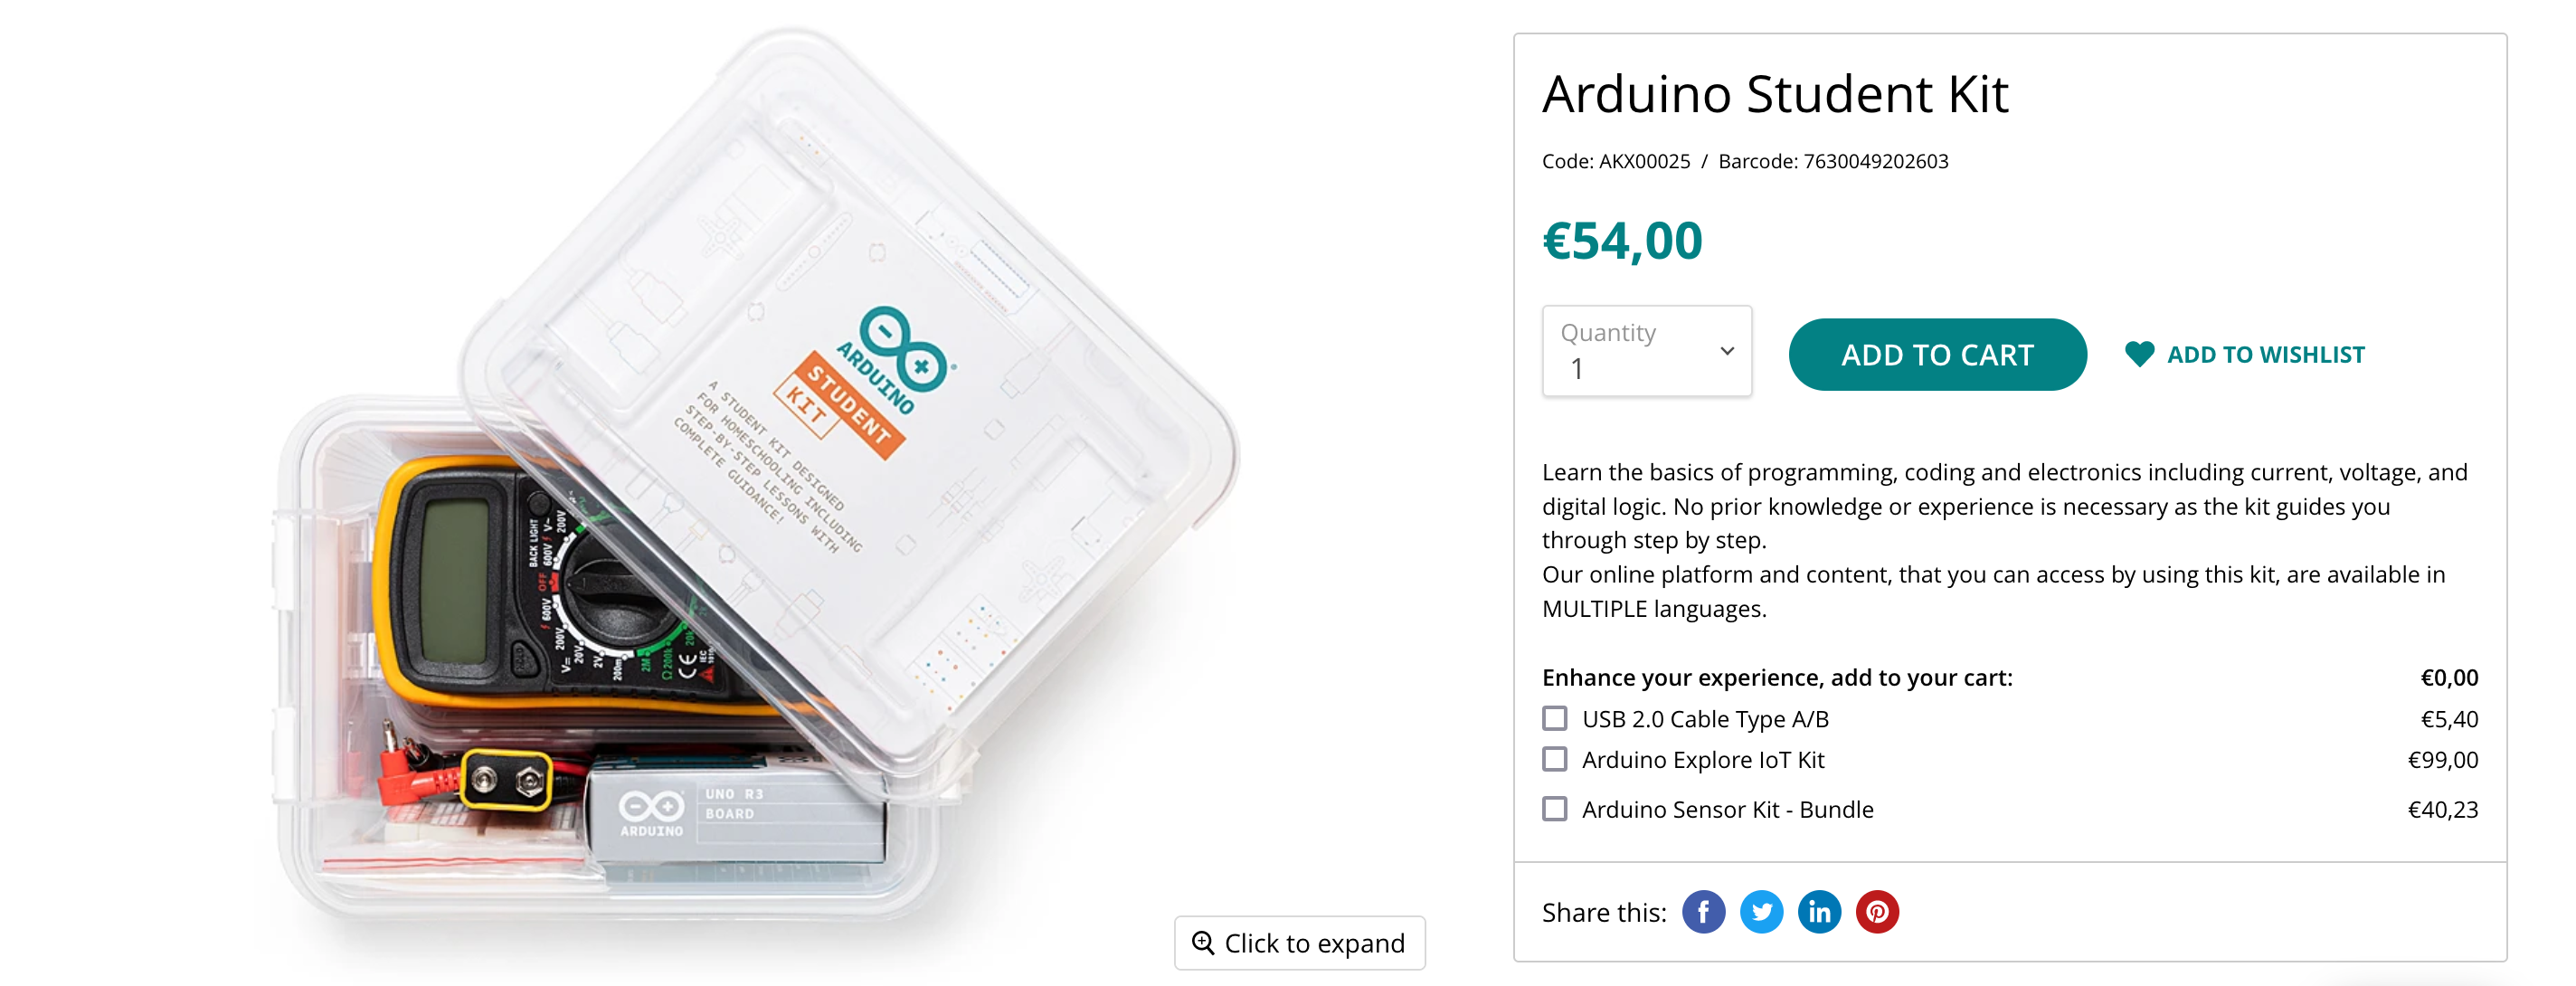 A screenshot of a plastic container with Arudino electronic parts inside next to price information about the Arduin student starter kit